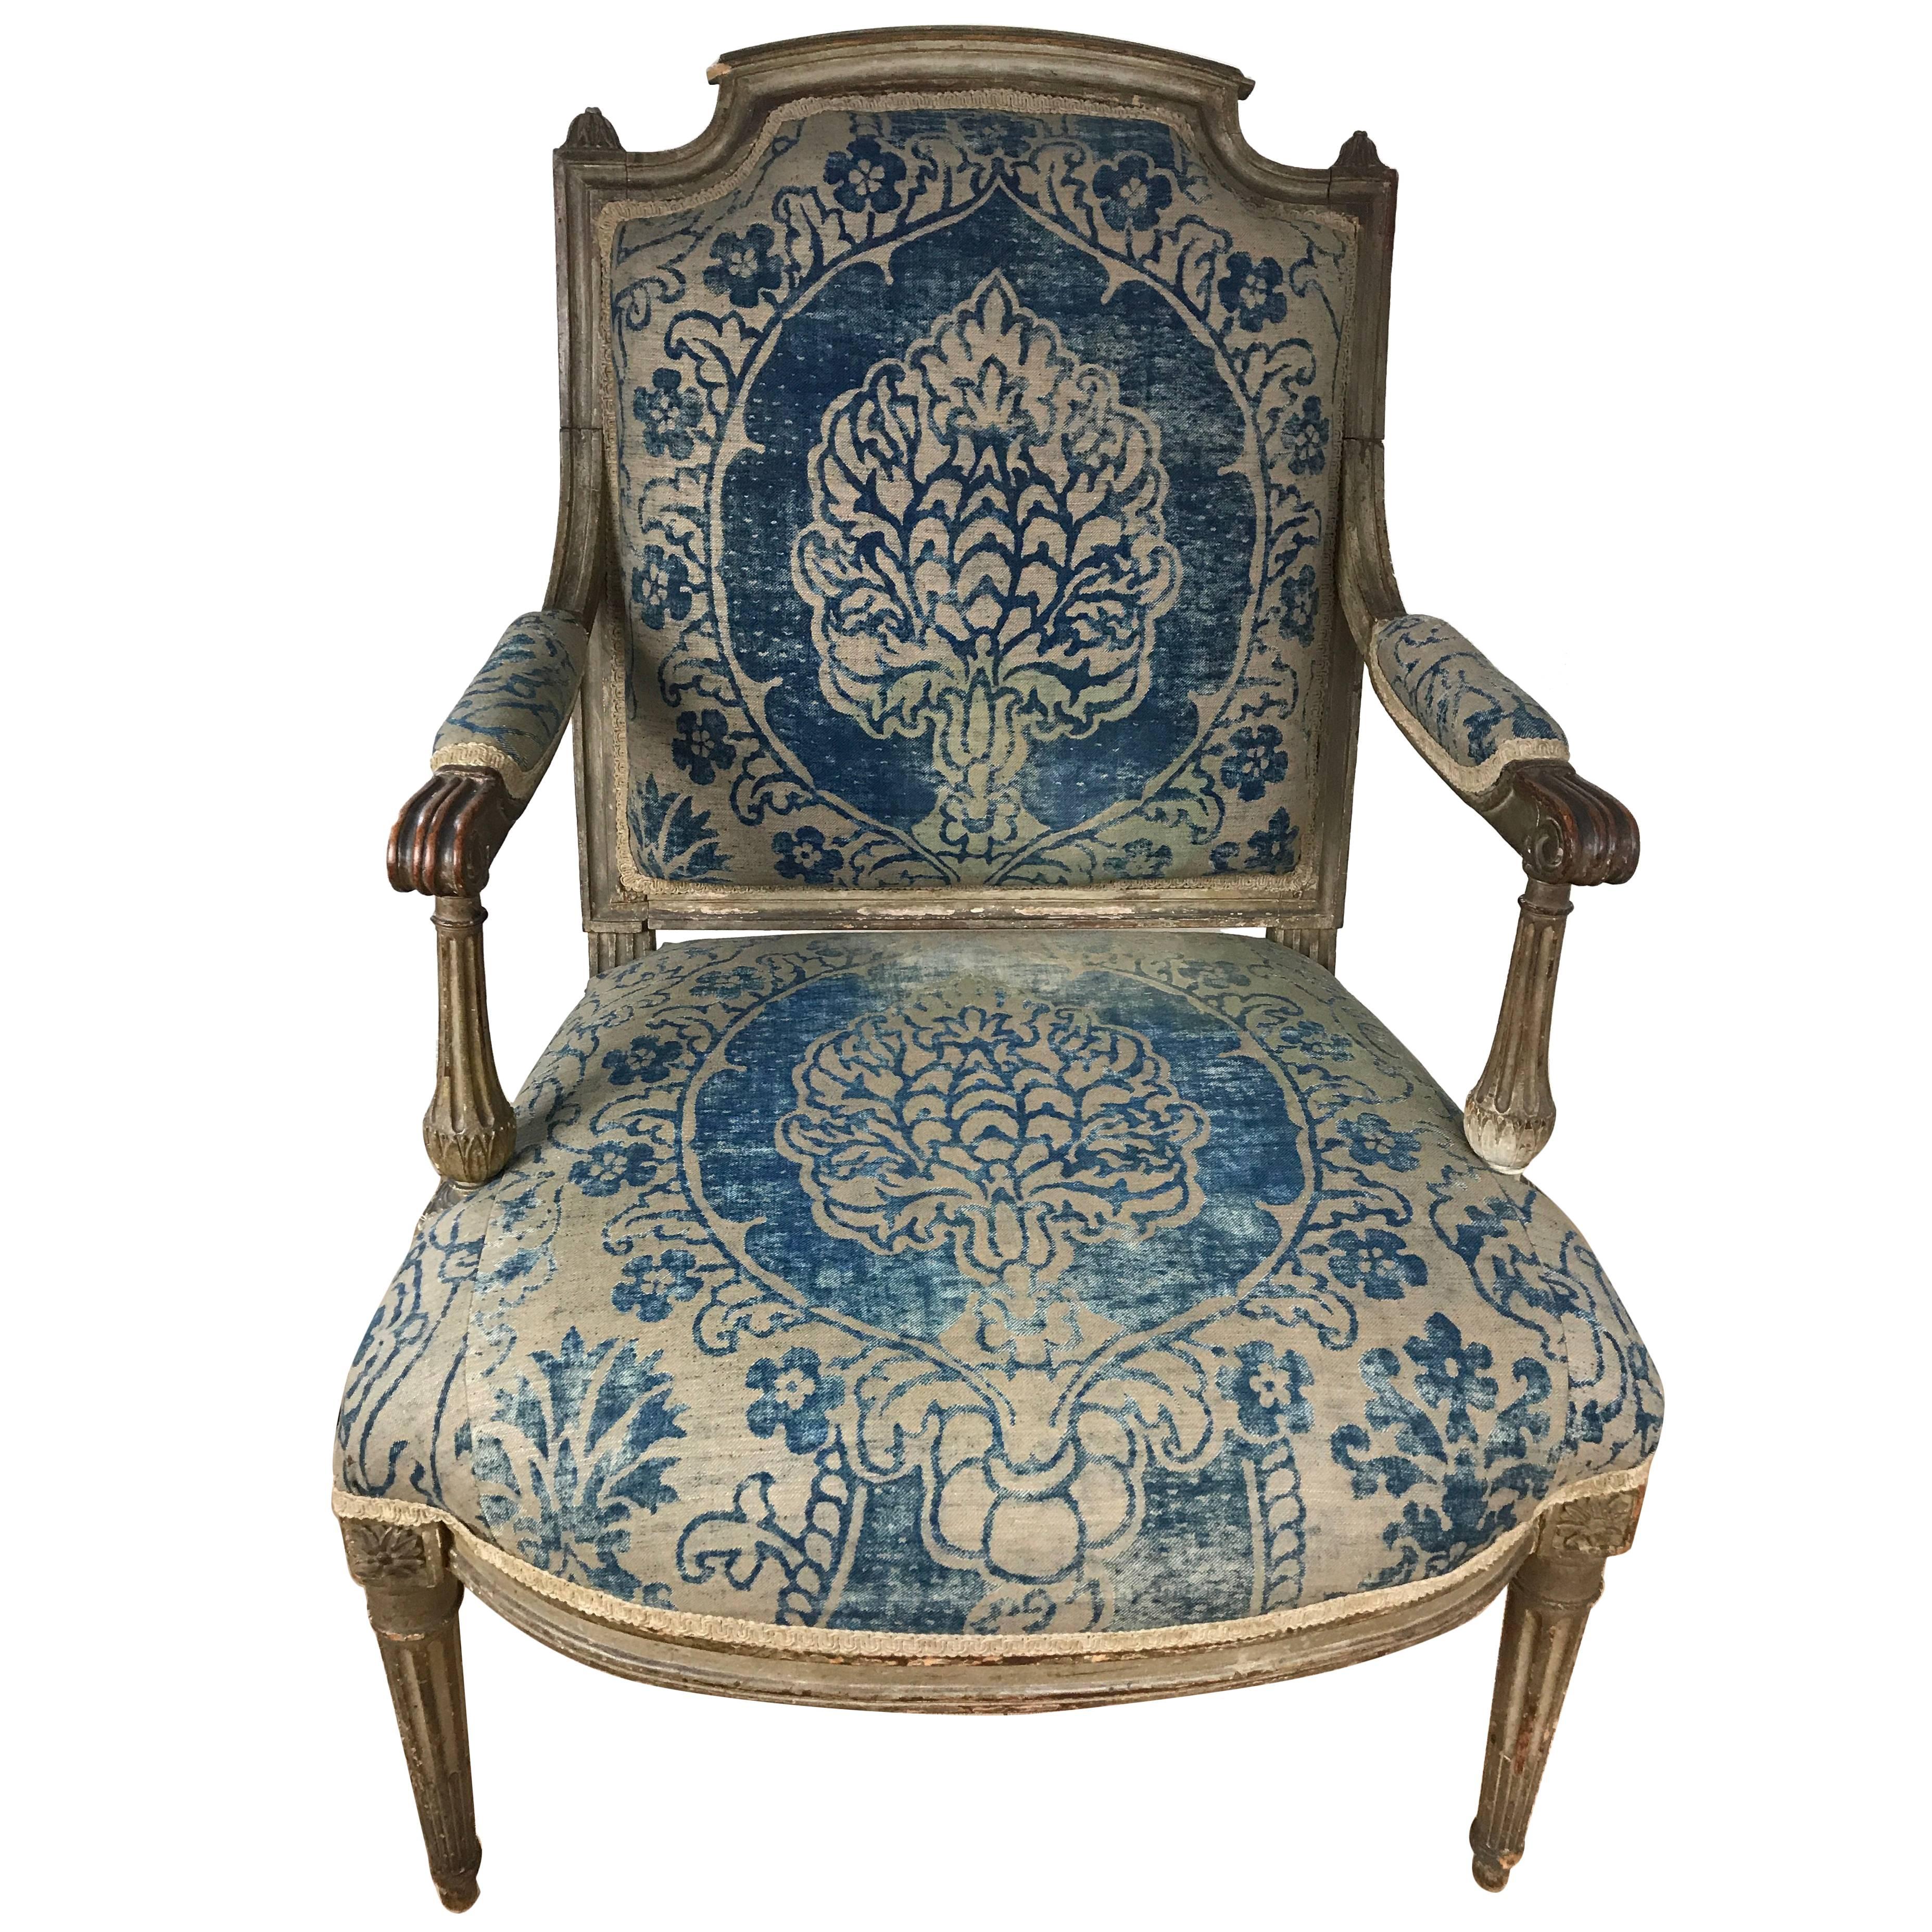 18th Century Louis XVI Fauteuil Upholstered in Fortuny Fabric